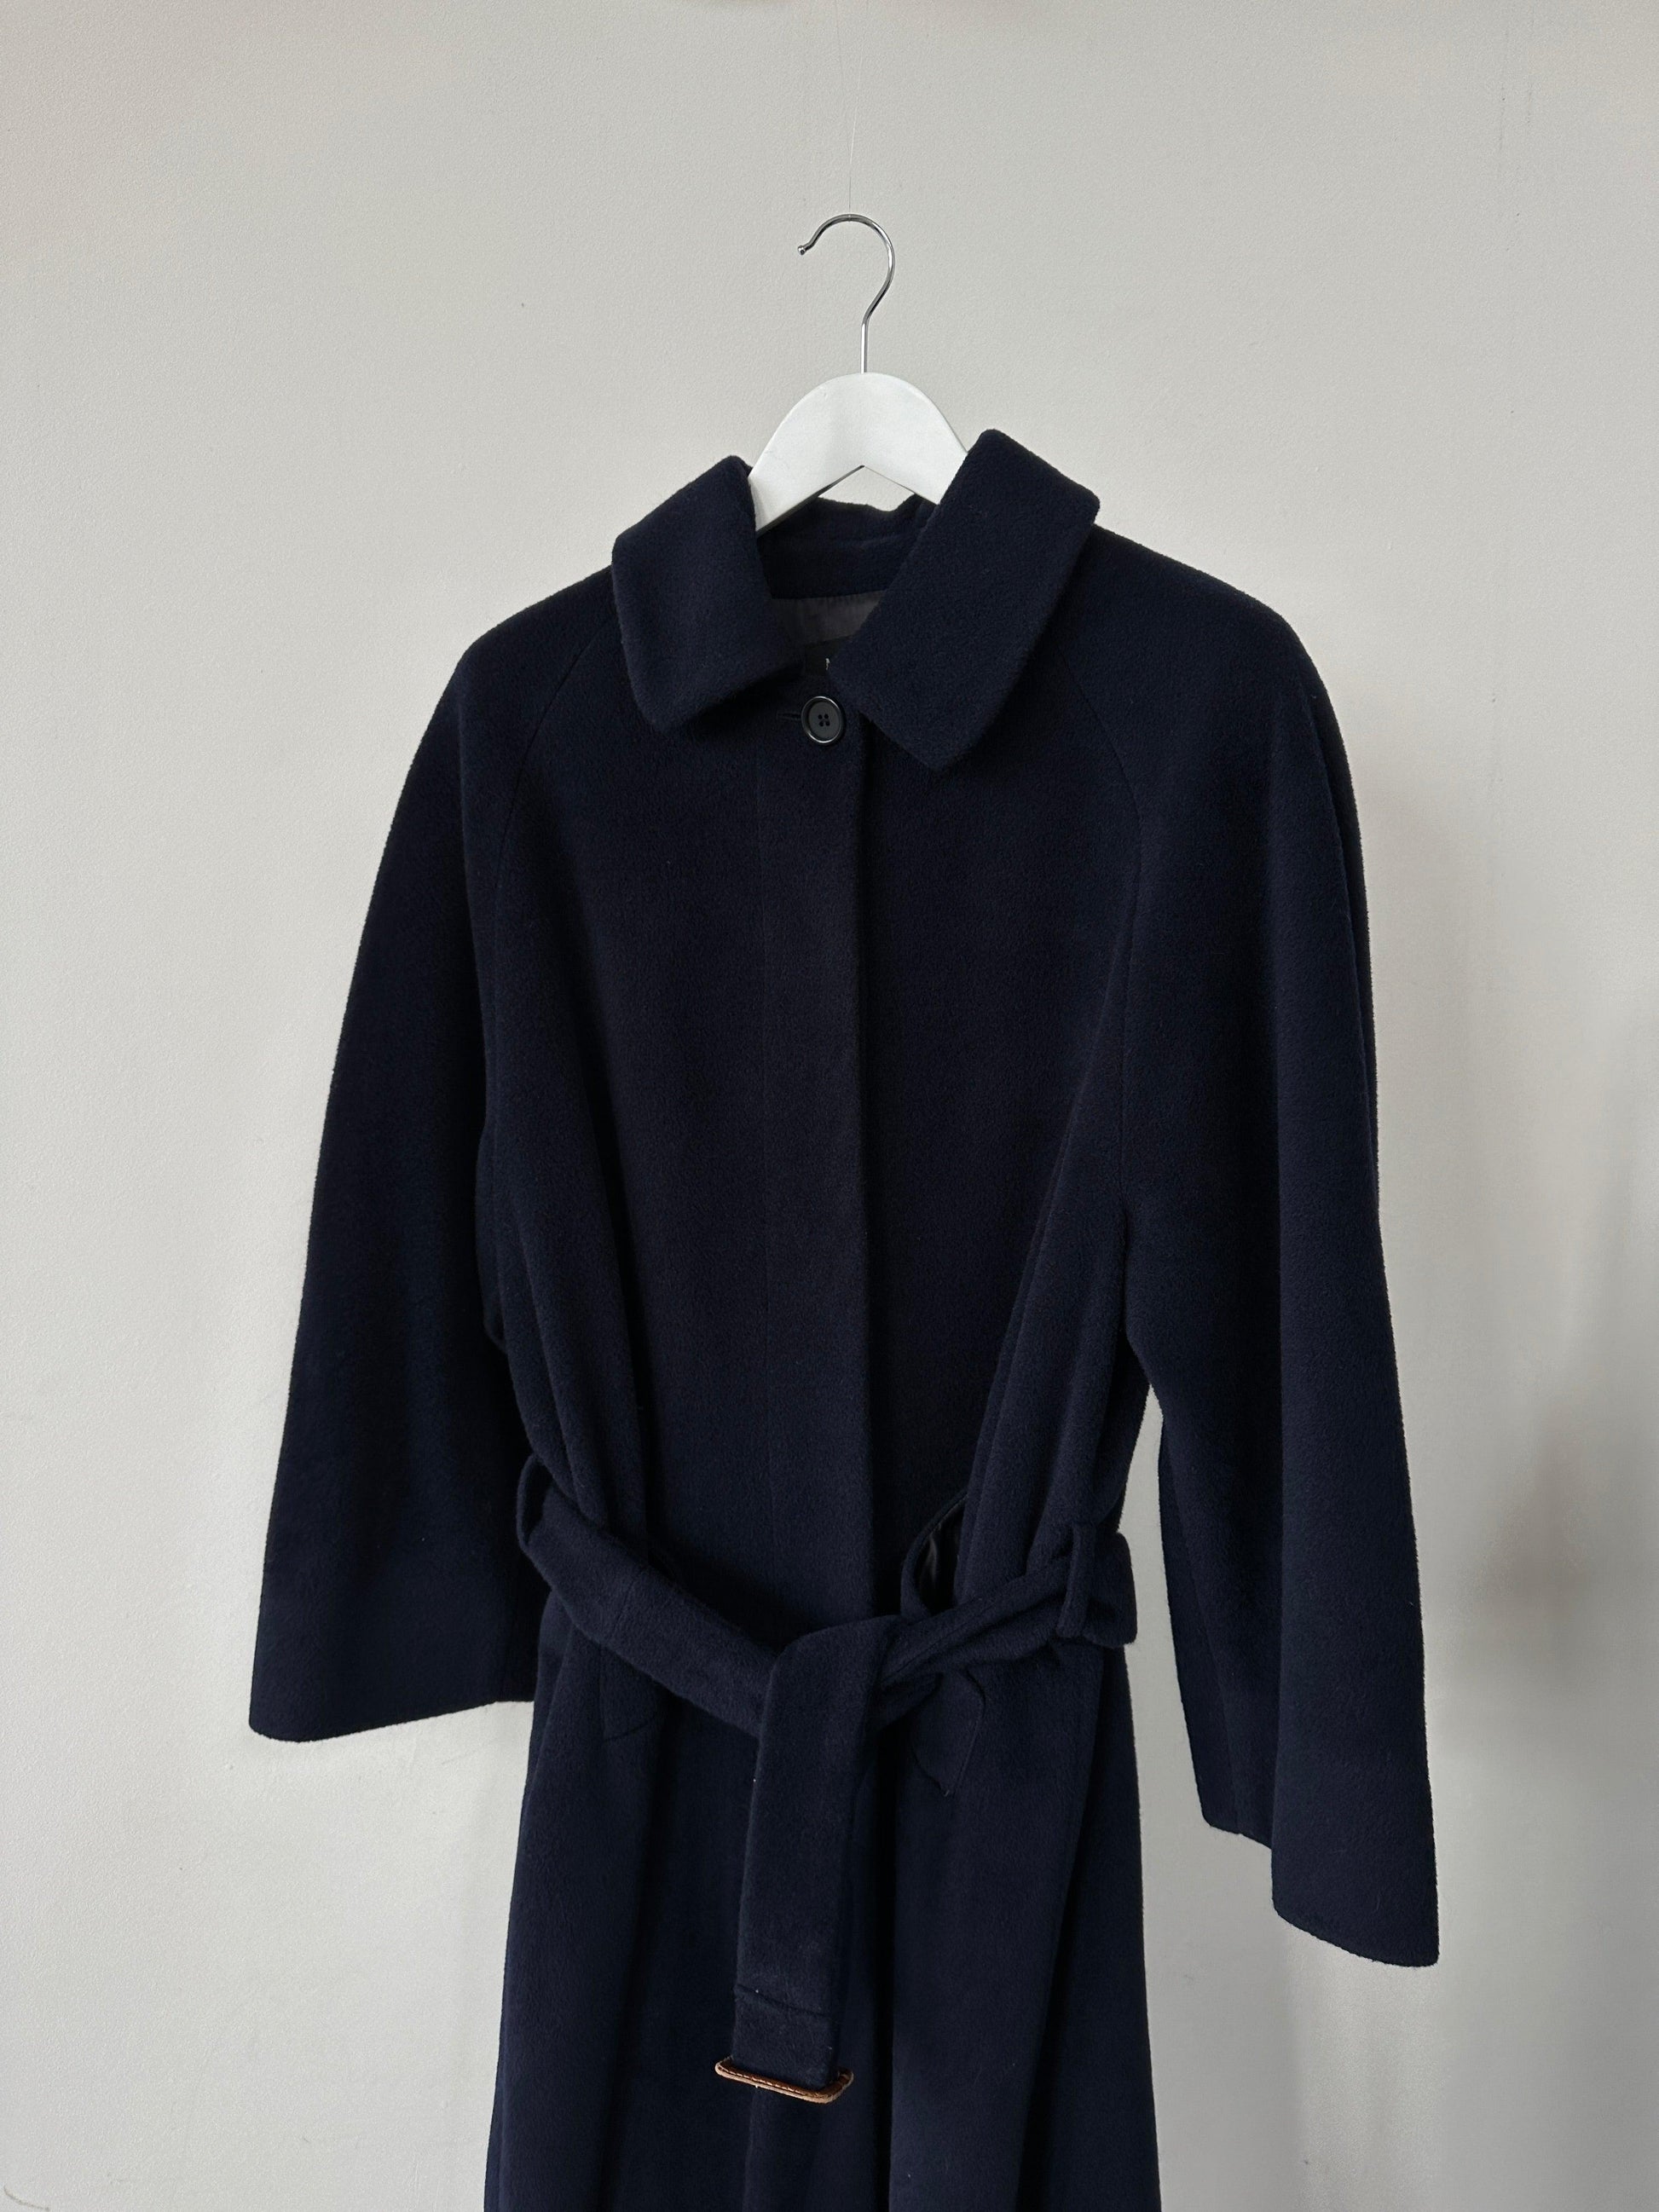 Vintage Wool Concealed Placket Single Breasted Belted Coat - L - Known Source